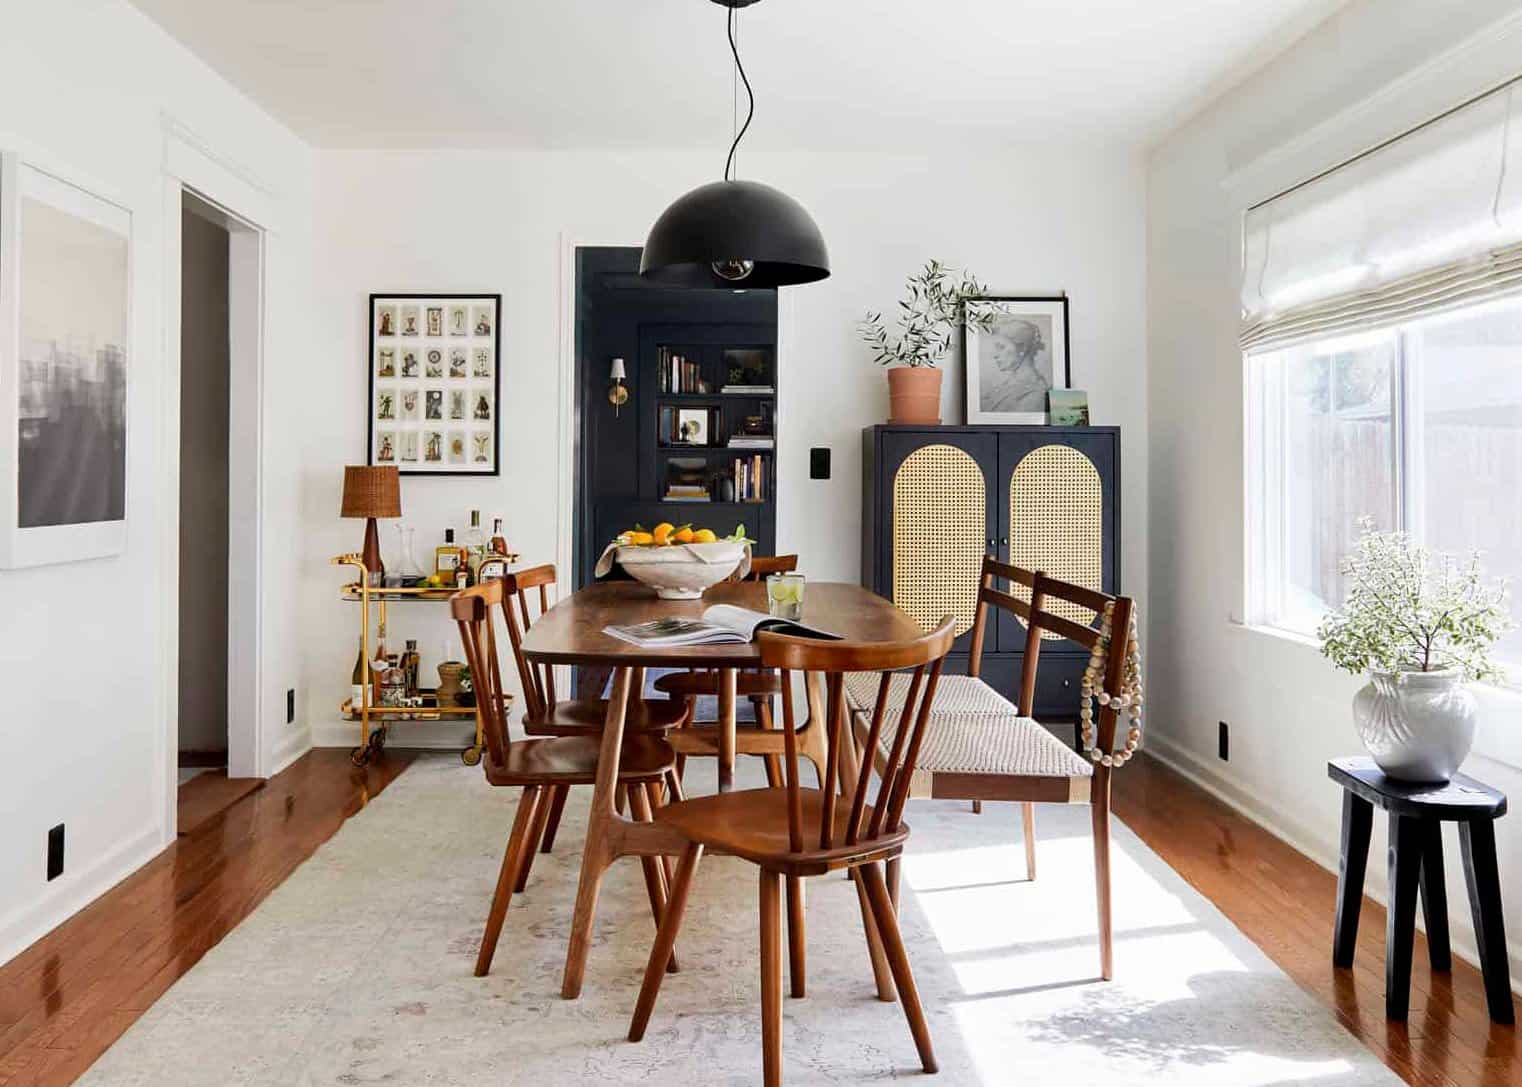 How Tall Should My Dining Chairs Be?